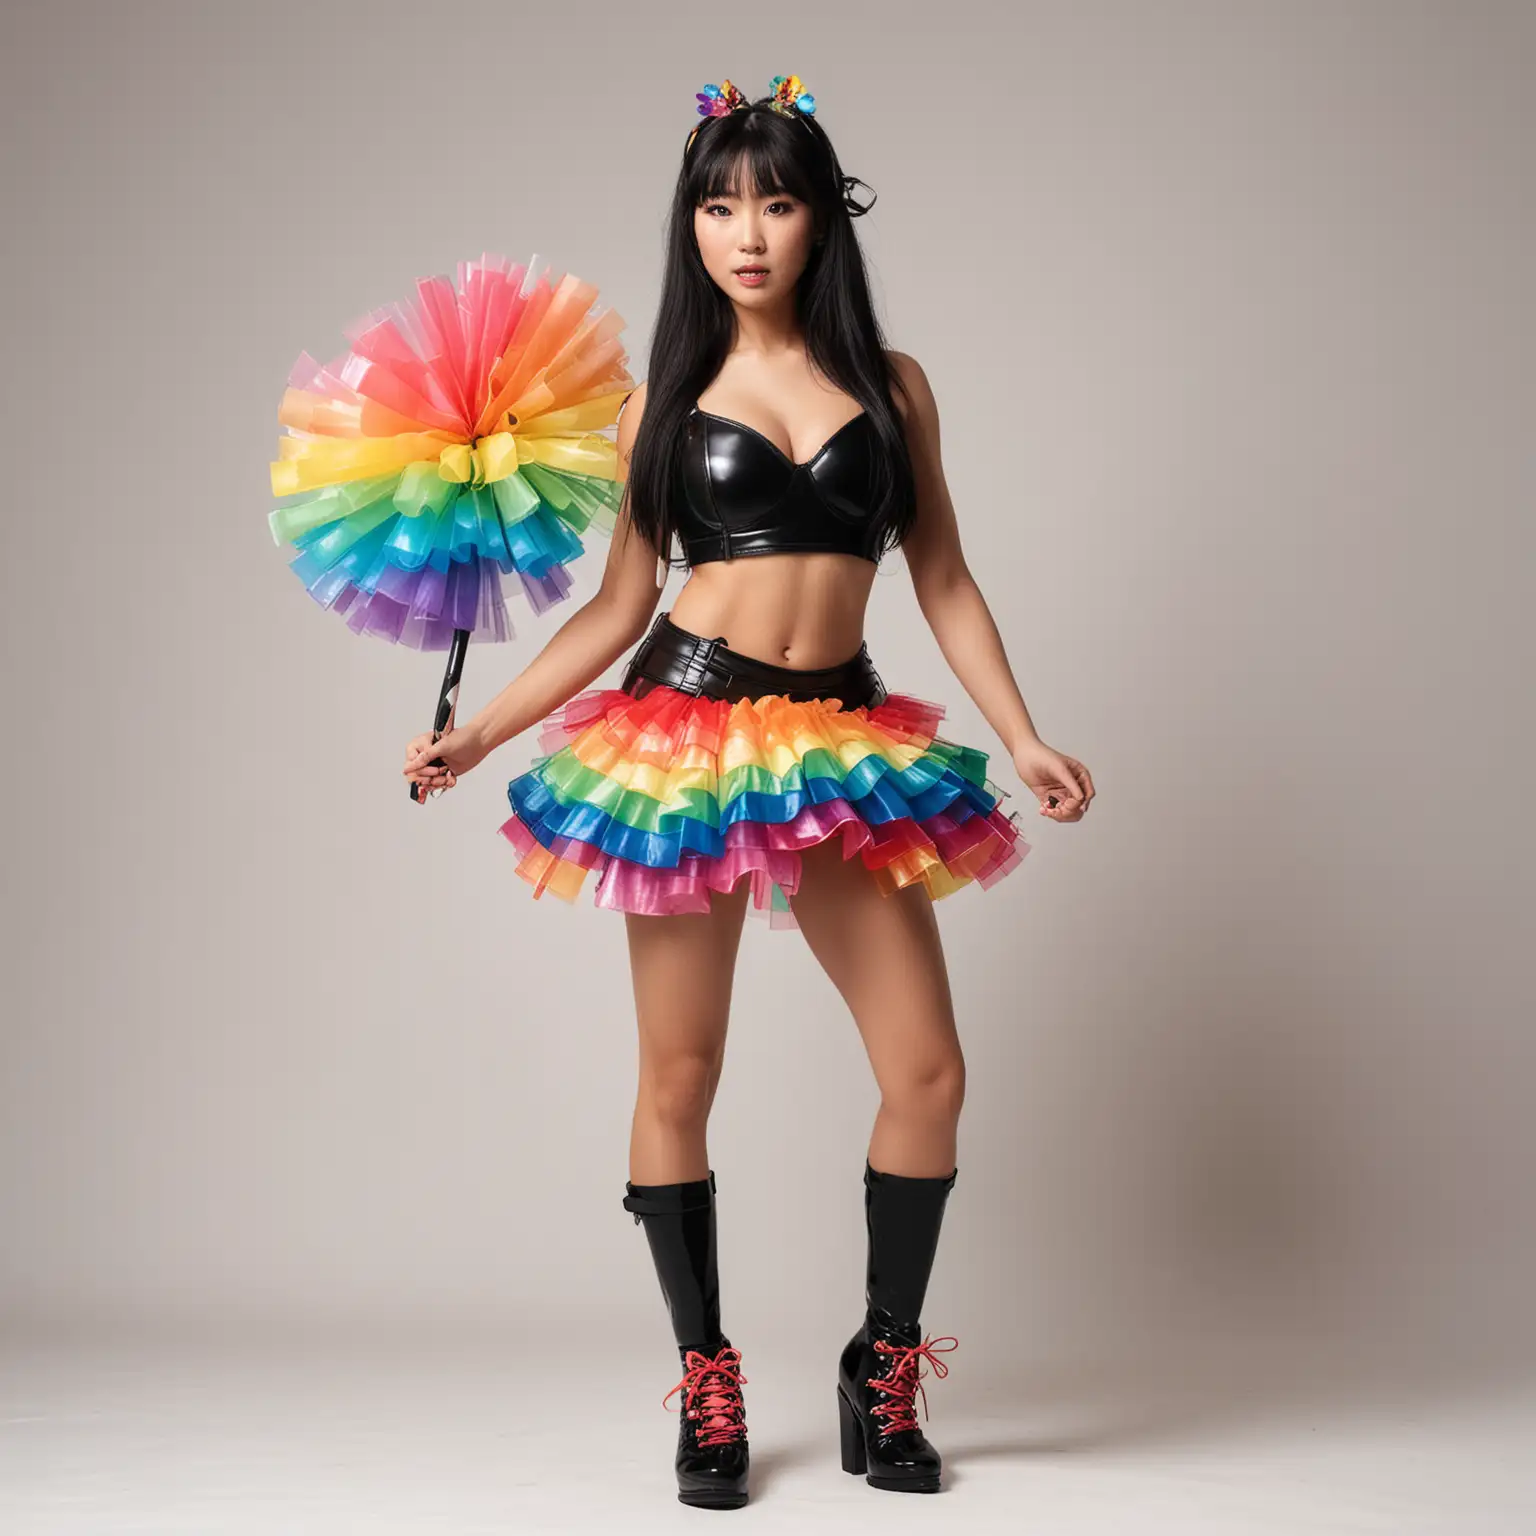 Standing front view, Beautiful toned athletic muscular figure female Japanese supermodel with large breasts, long black hair, in sleeveless black samurai plastic armor, exposed midriff, giant puffy rainbow ballerina tutu, rainbow thigh-high socks, black high-heels, white background